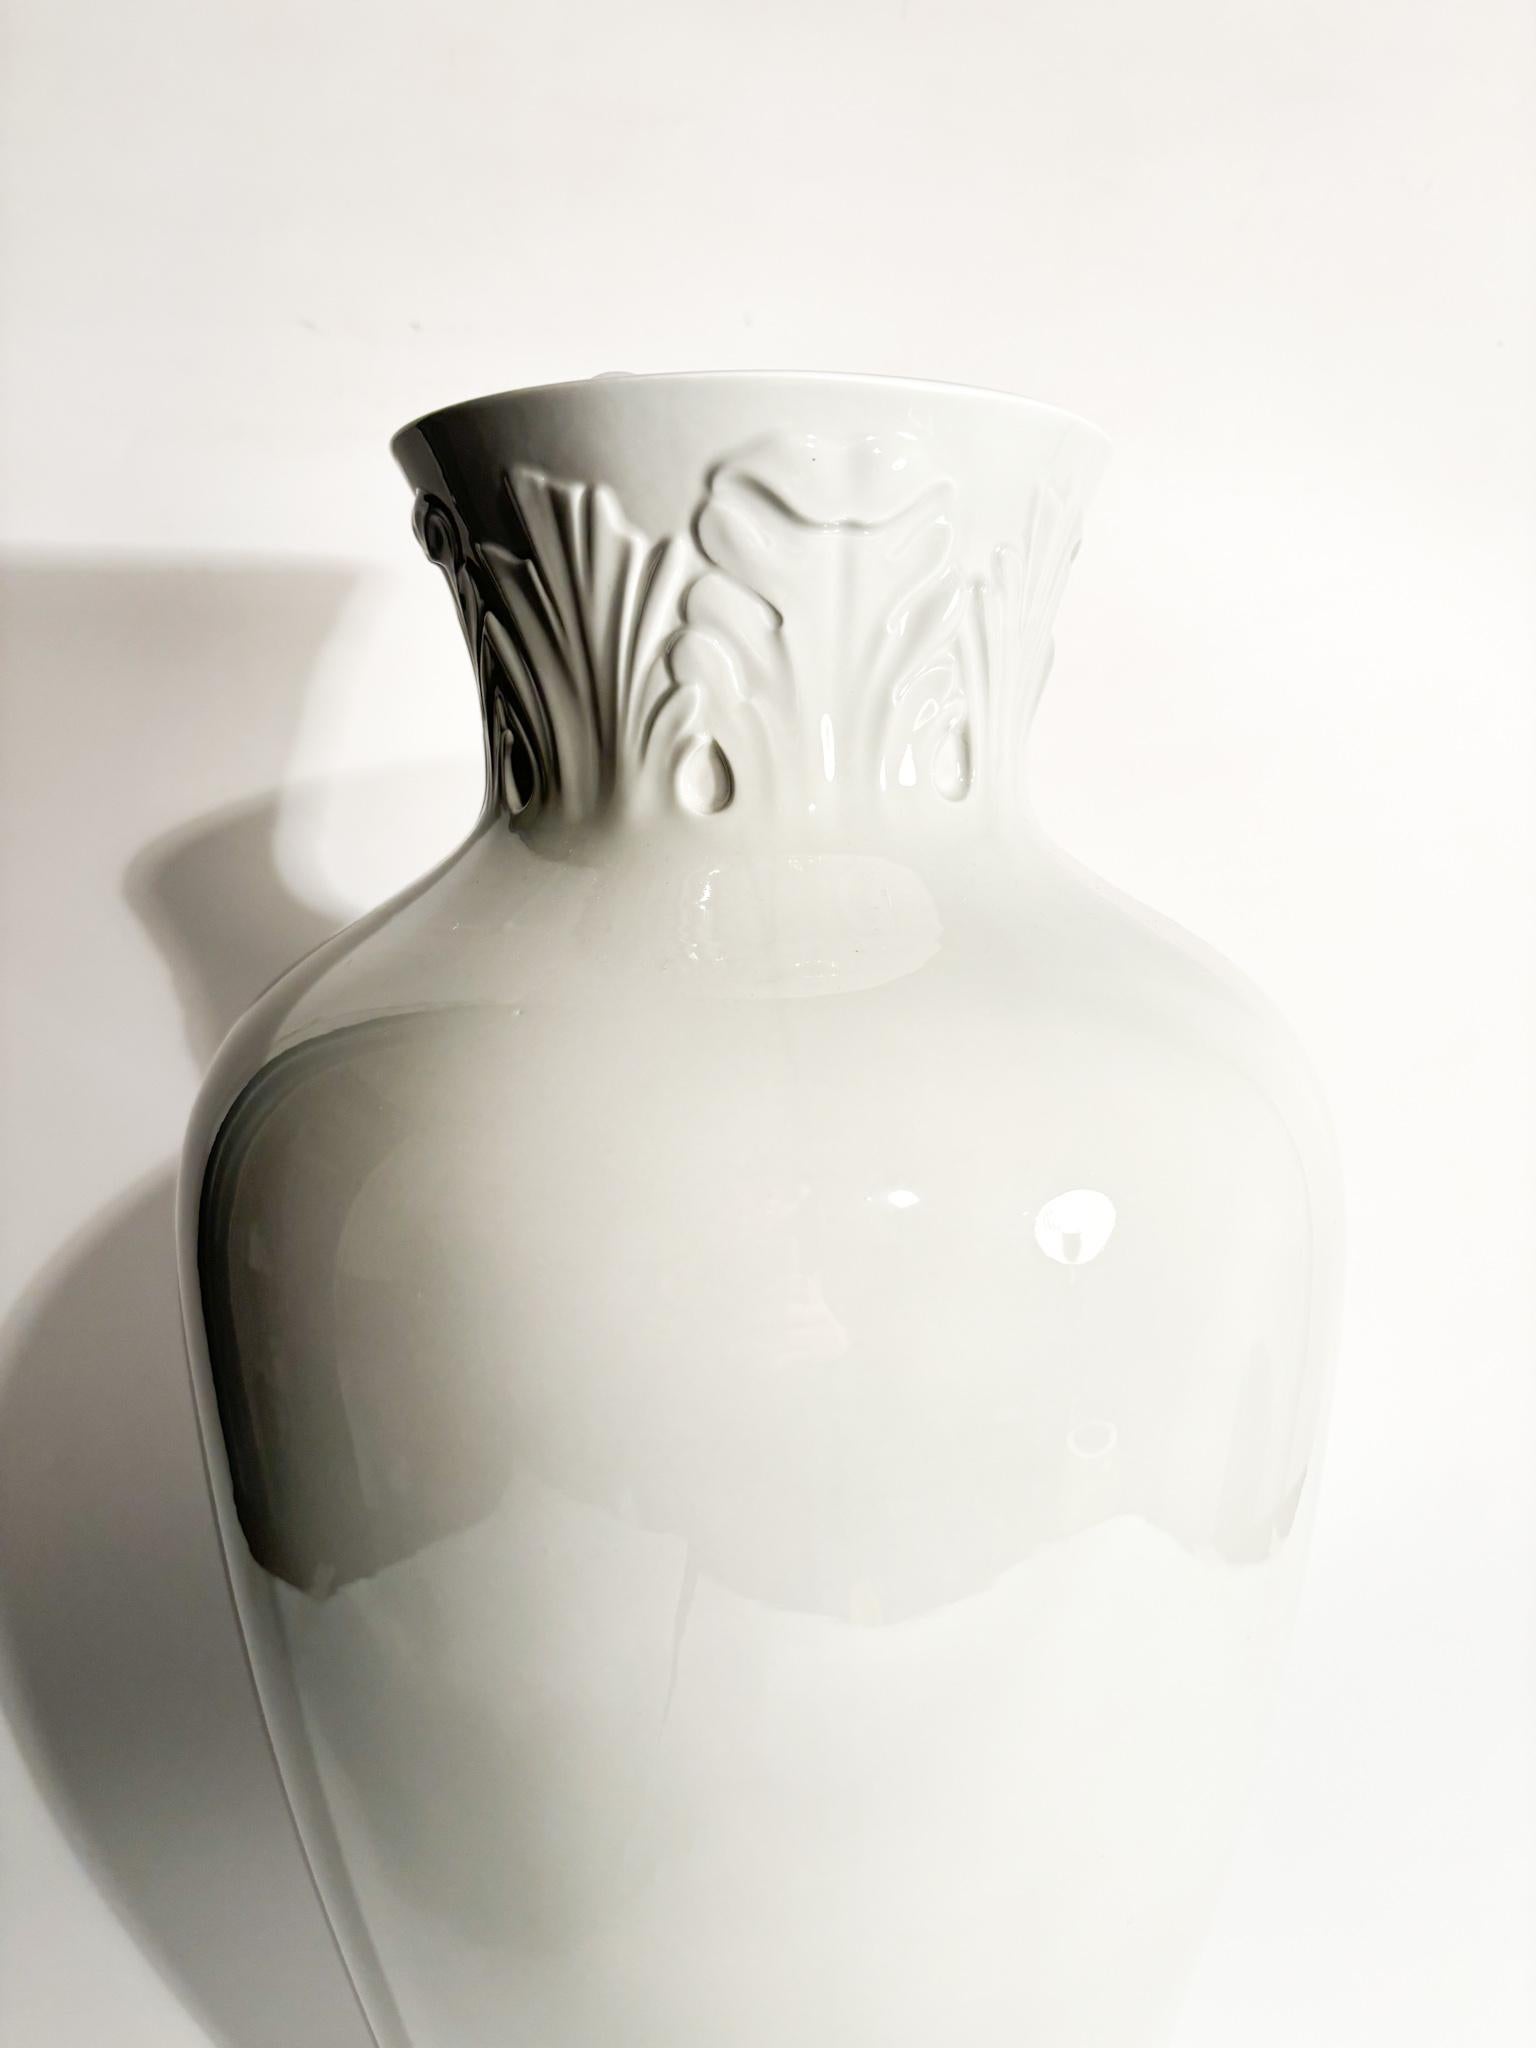 Art Deco Porcelain Vase by Richard Ginori Gray 'Manifattura 1946' from the 1990s For Sale